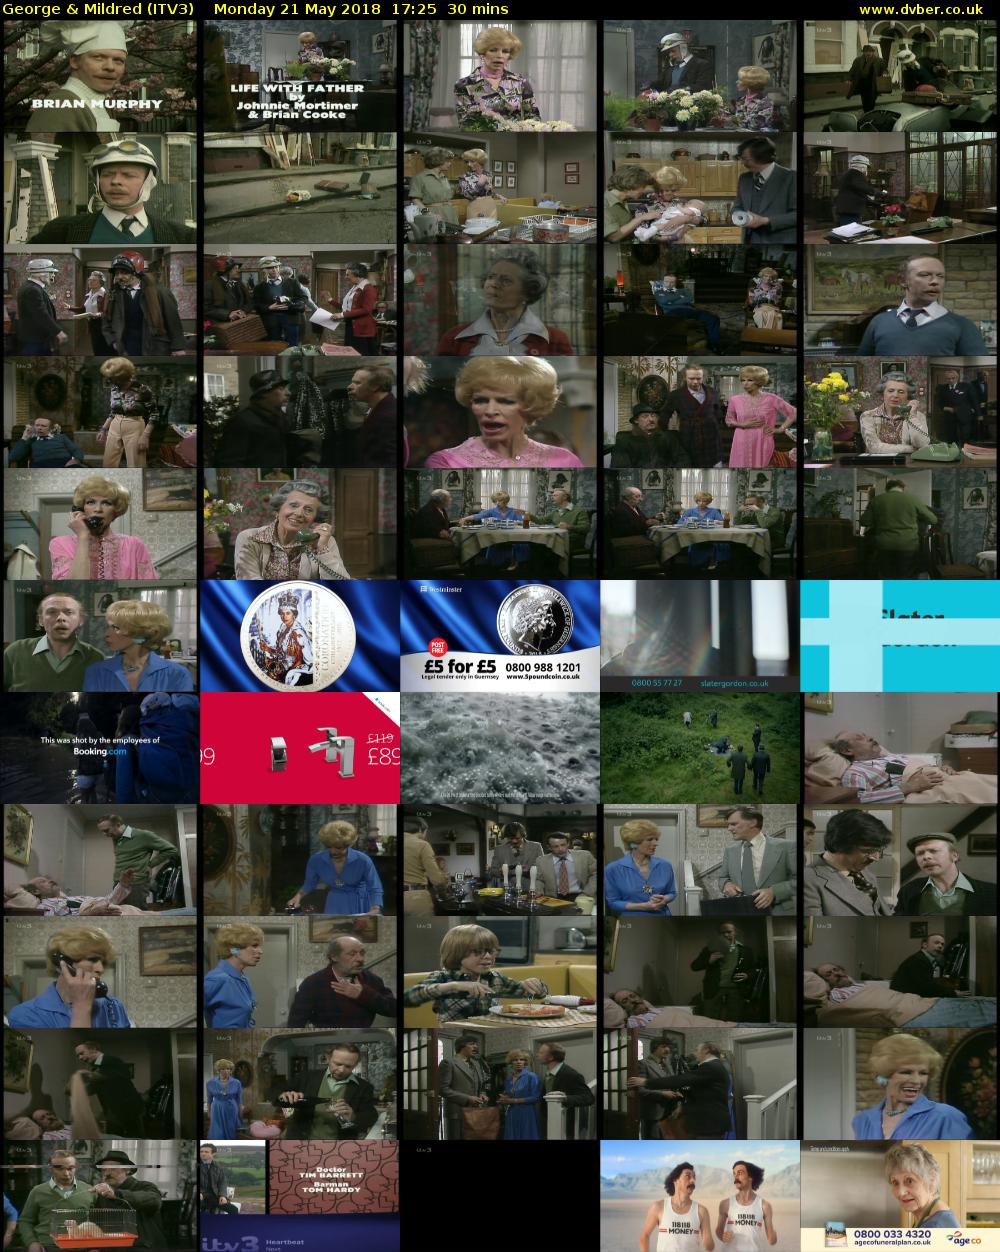 George & Mildred (ITV3) Monday 21 May 2018 17:25 - 17:55